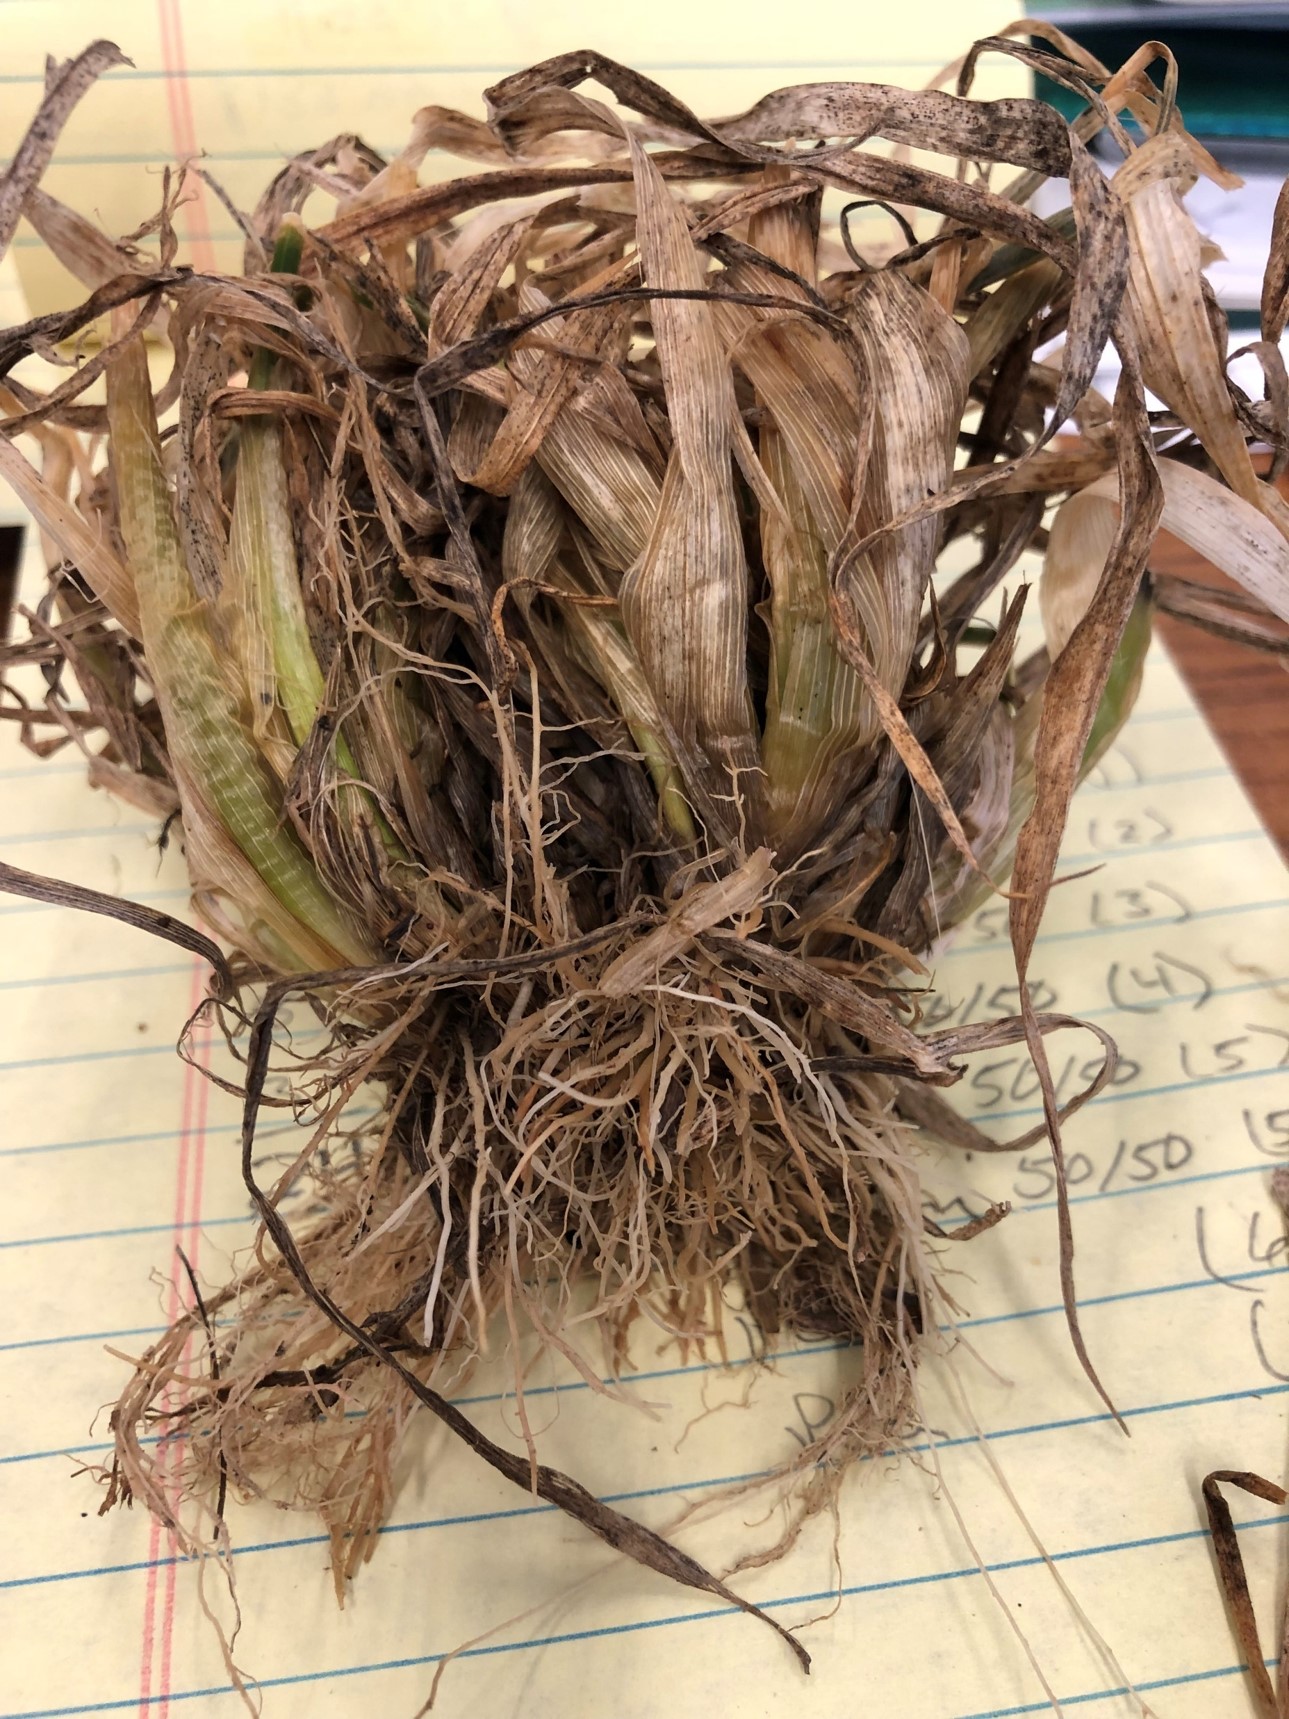 This winter wheat sample shows considerable freeze damage. While the plant may still recover, forage production will be reduced. (NDSU photo)